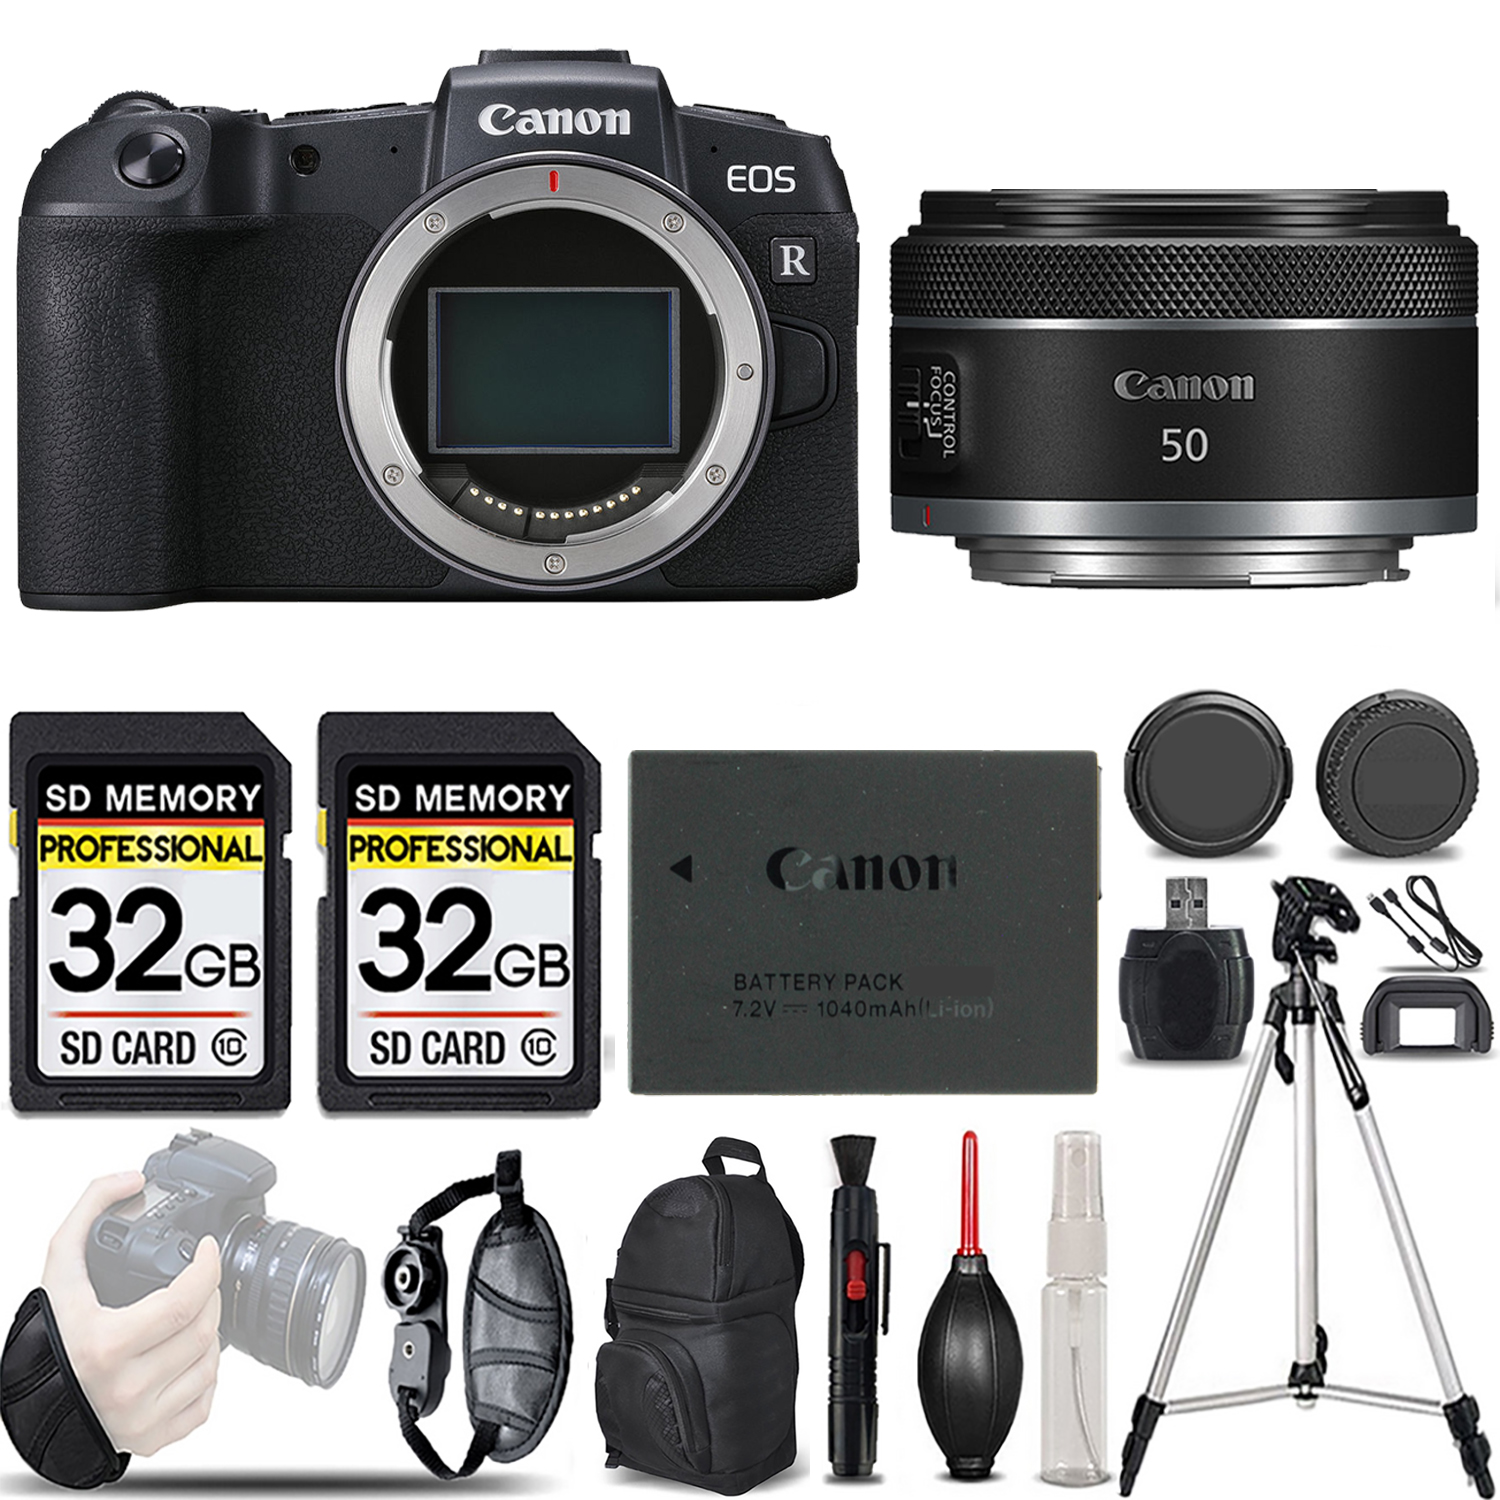 EOS RP Mirrorless Camera + 50mm f/1.8 STM Lens - LOADED KIT *FREE SHIPPING*